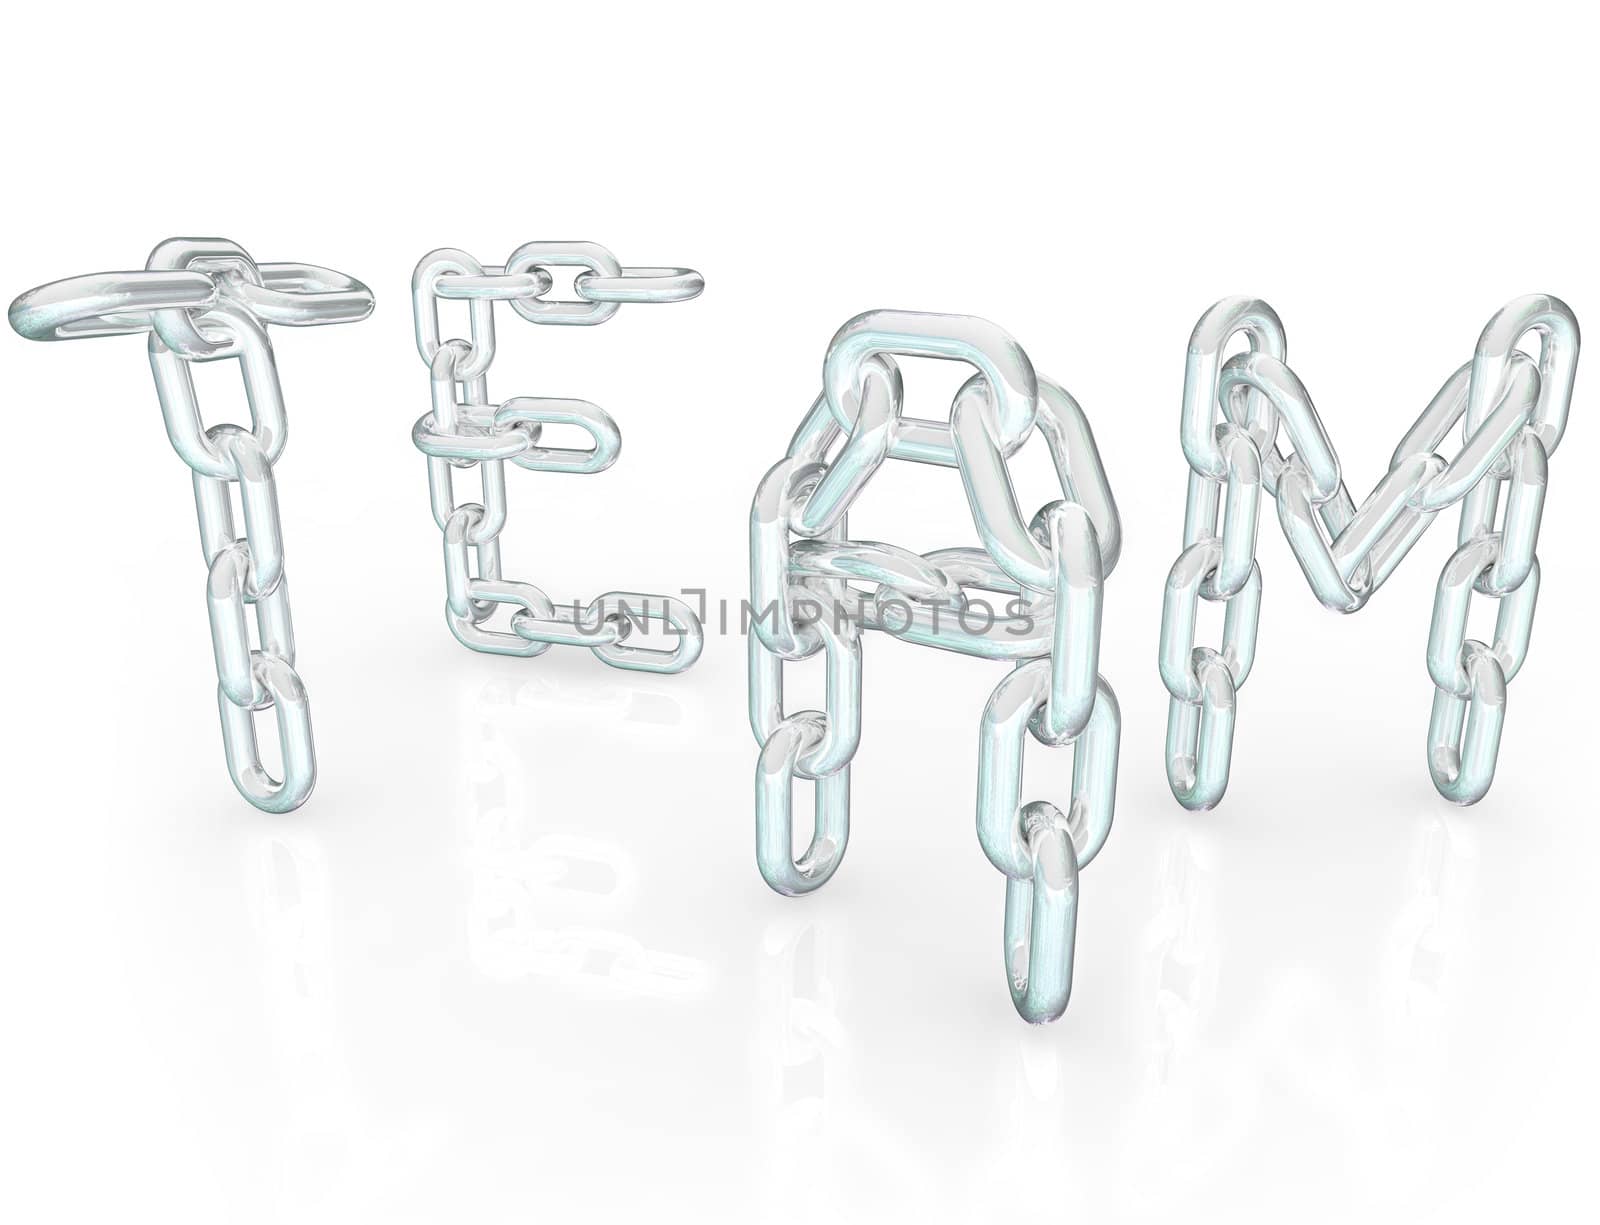 The word Team made up of chain links symbolizing teamwork, togetherness, community, solidarity and society, people joining together to work for the common good